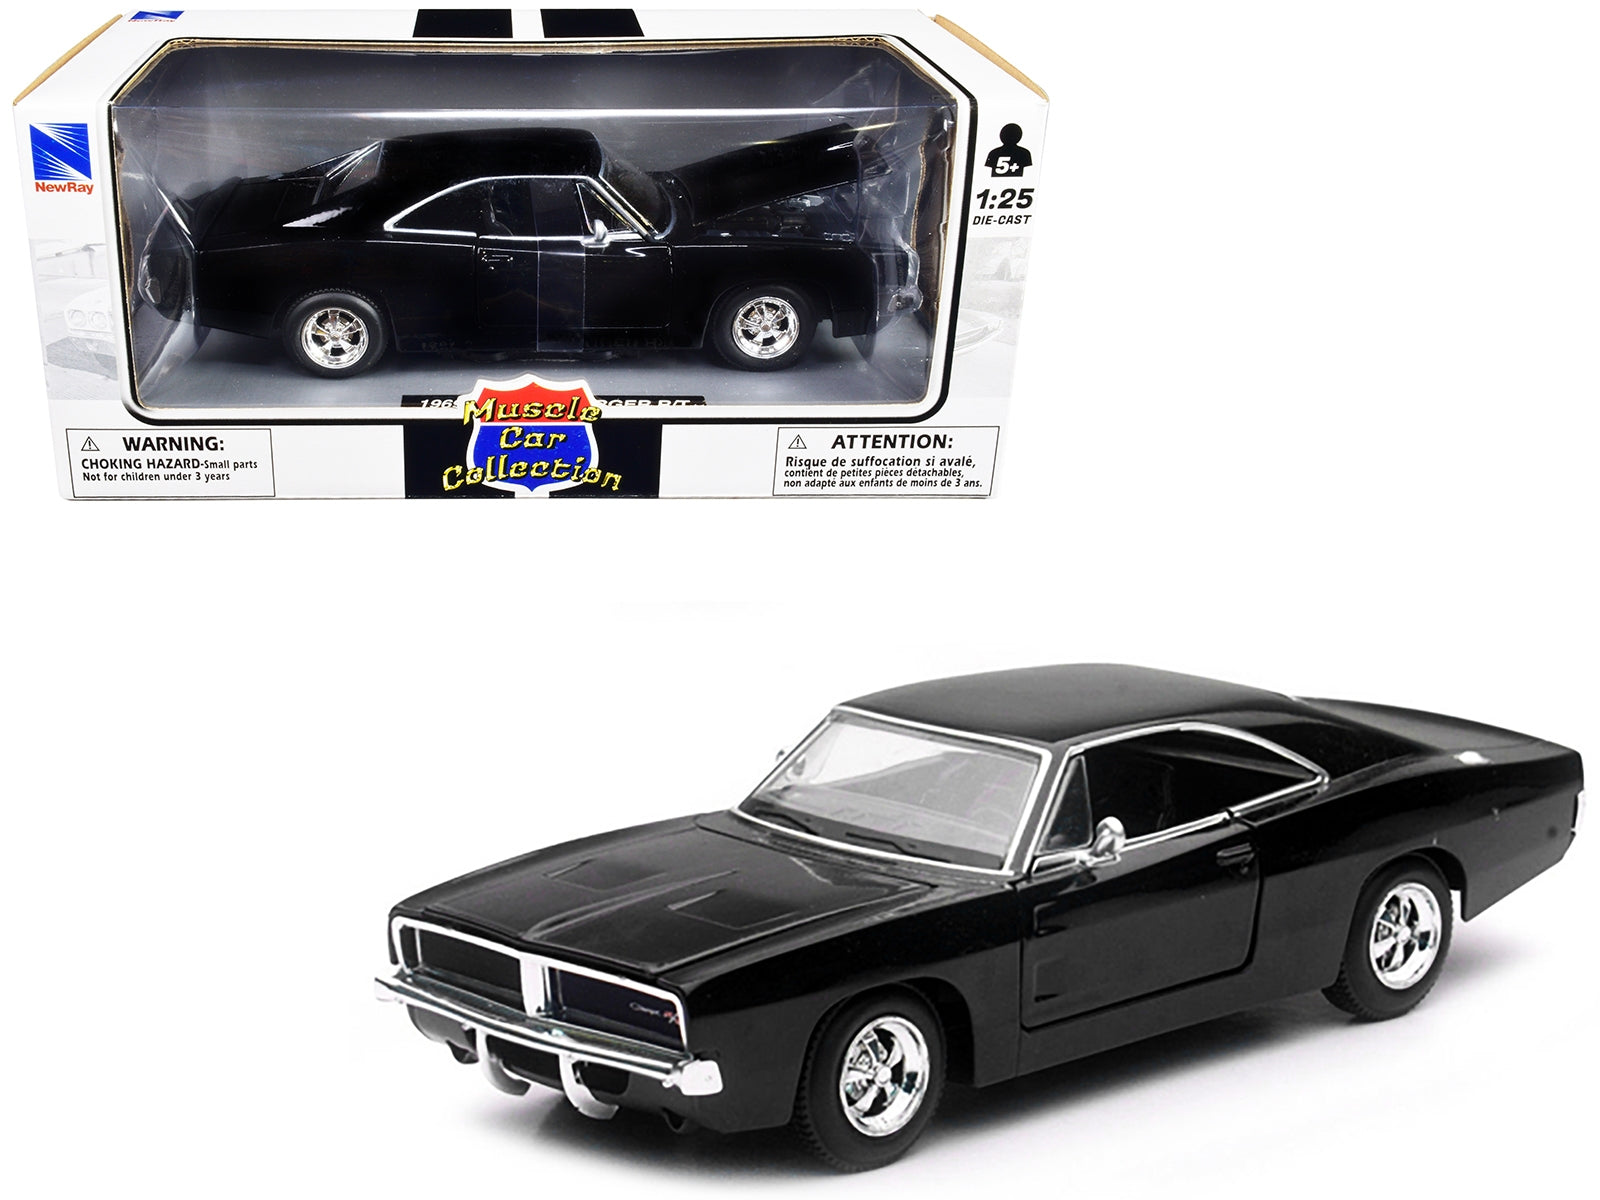 1969 Dodge Charger R/T Black "Muscle Car Collection" 1/25 Diecast Model Car by New Ray New Ray